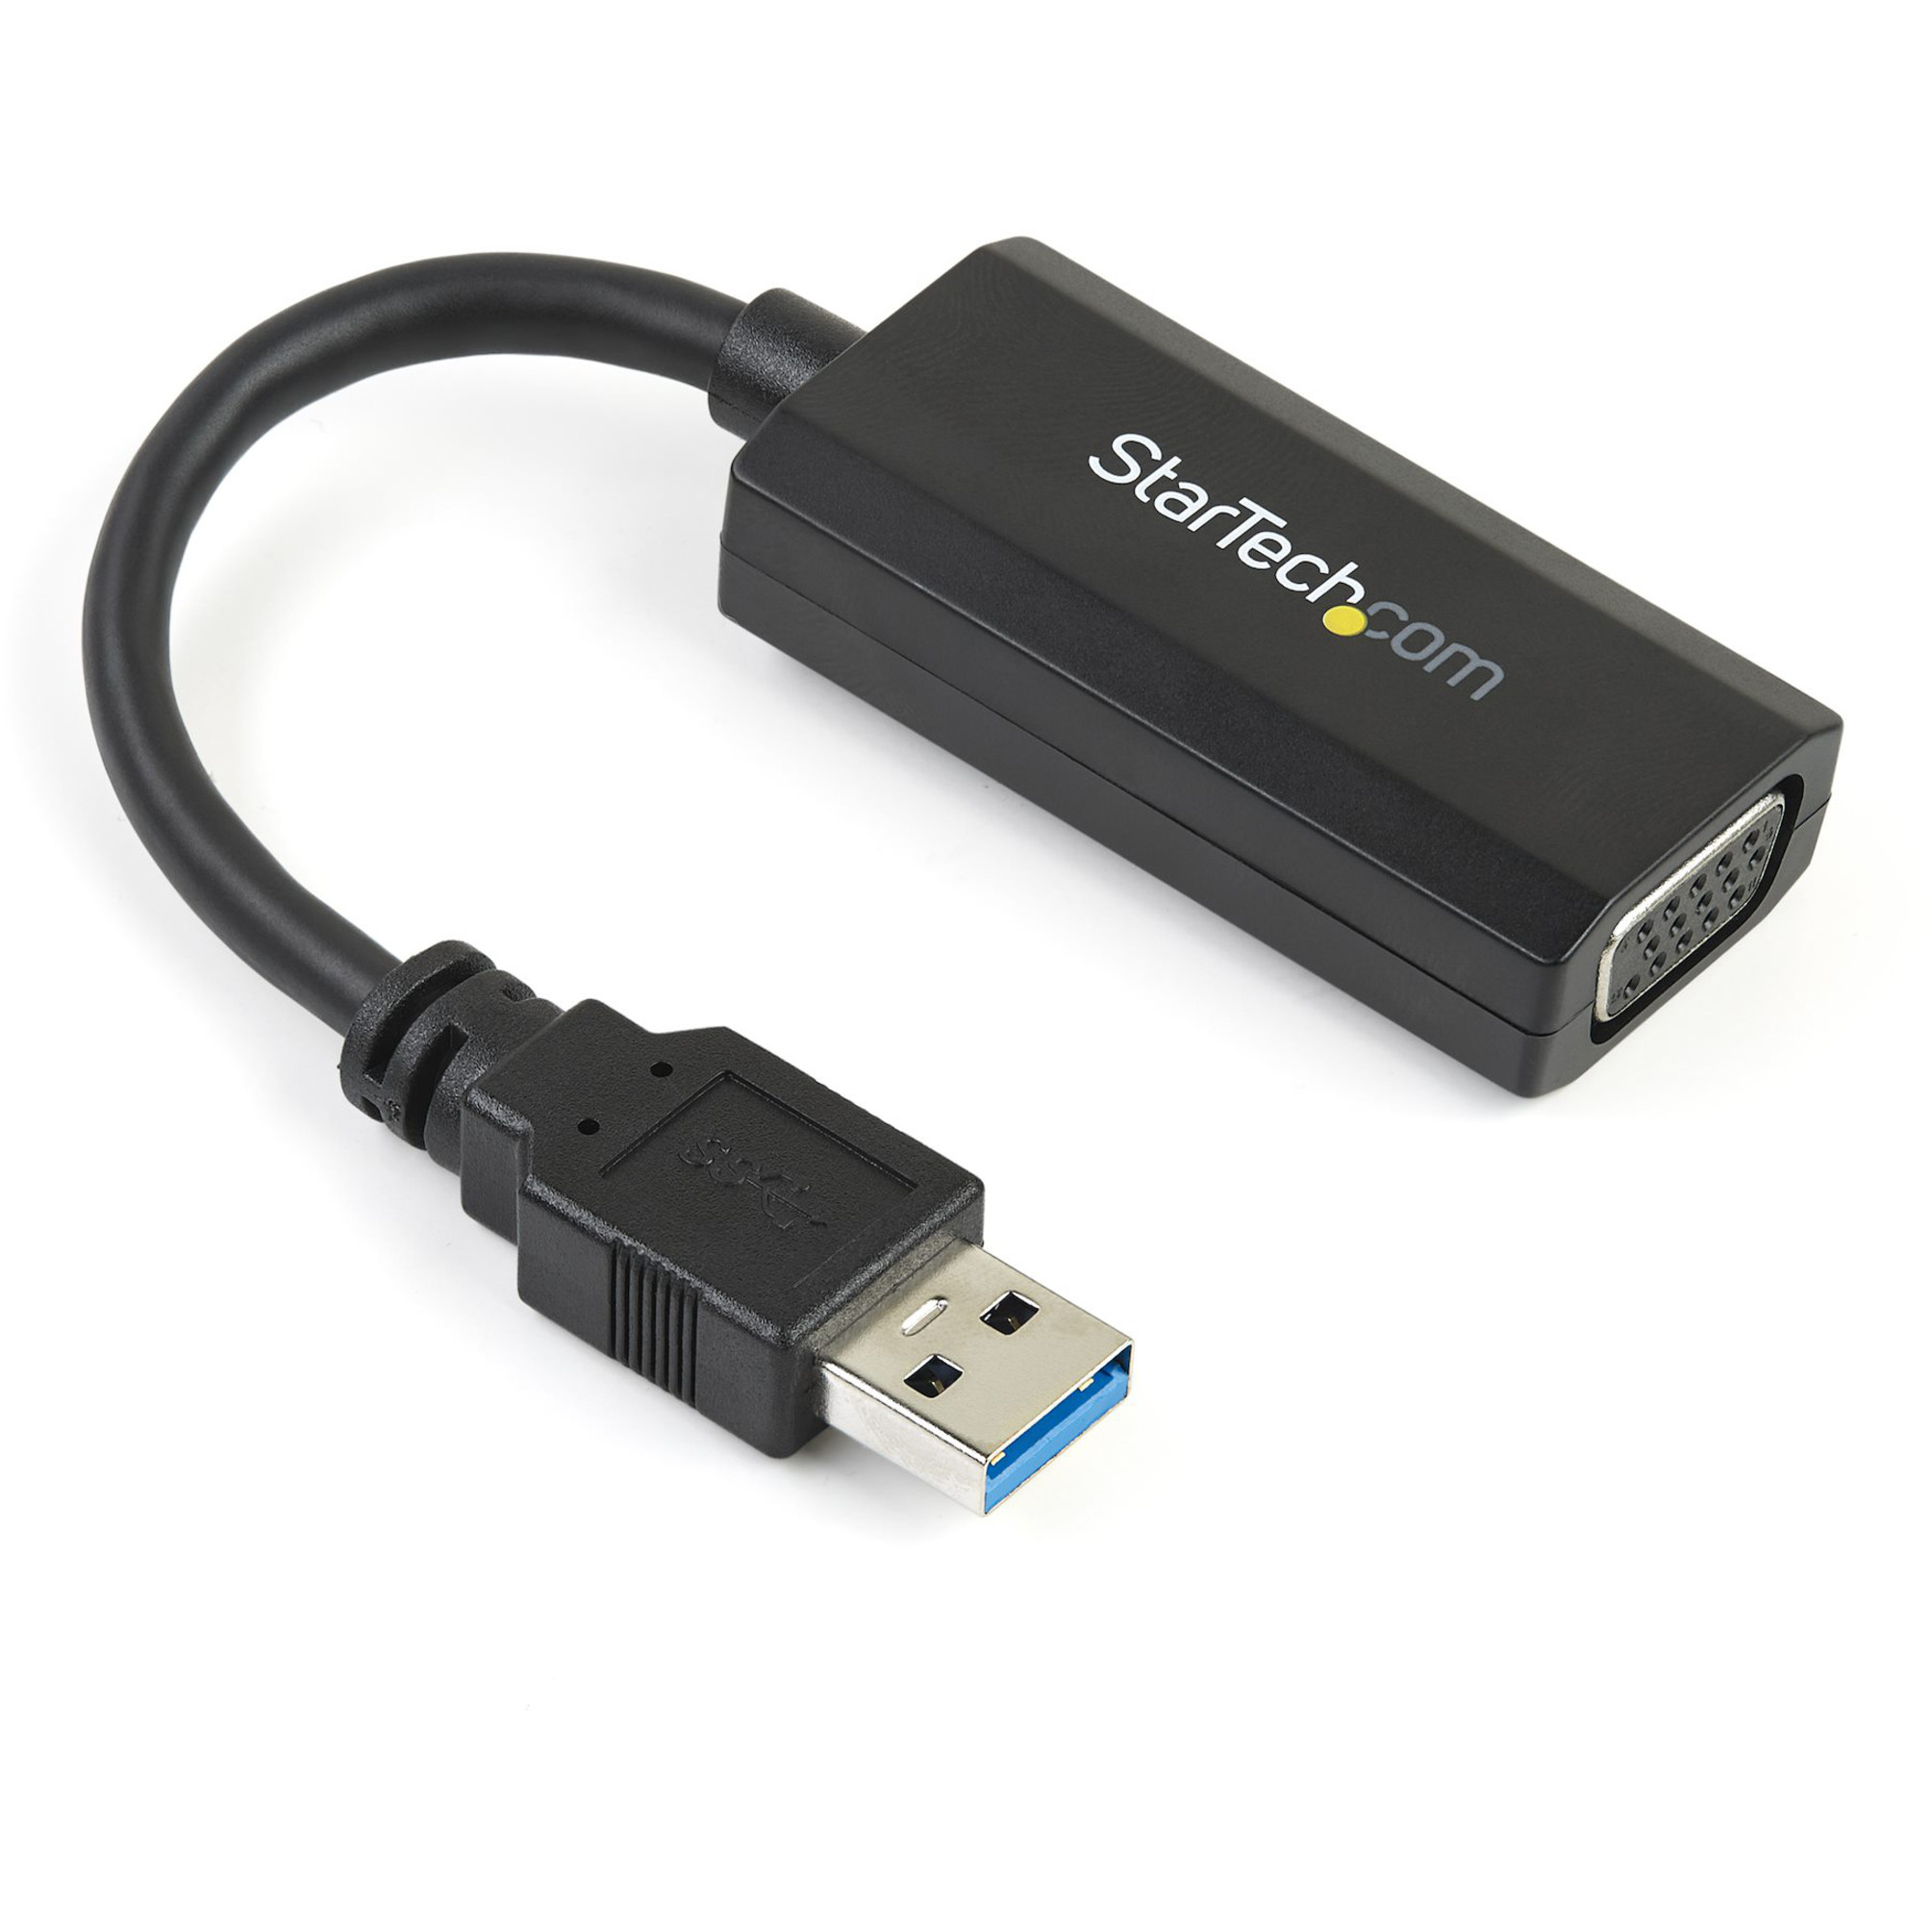 Startech .com USB 3.0 to VGA Video Adapter with On-board Driver Installation1920x1200Add a secondary VGA display to your USB 3.0 enabled… USB32VGAV